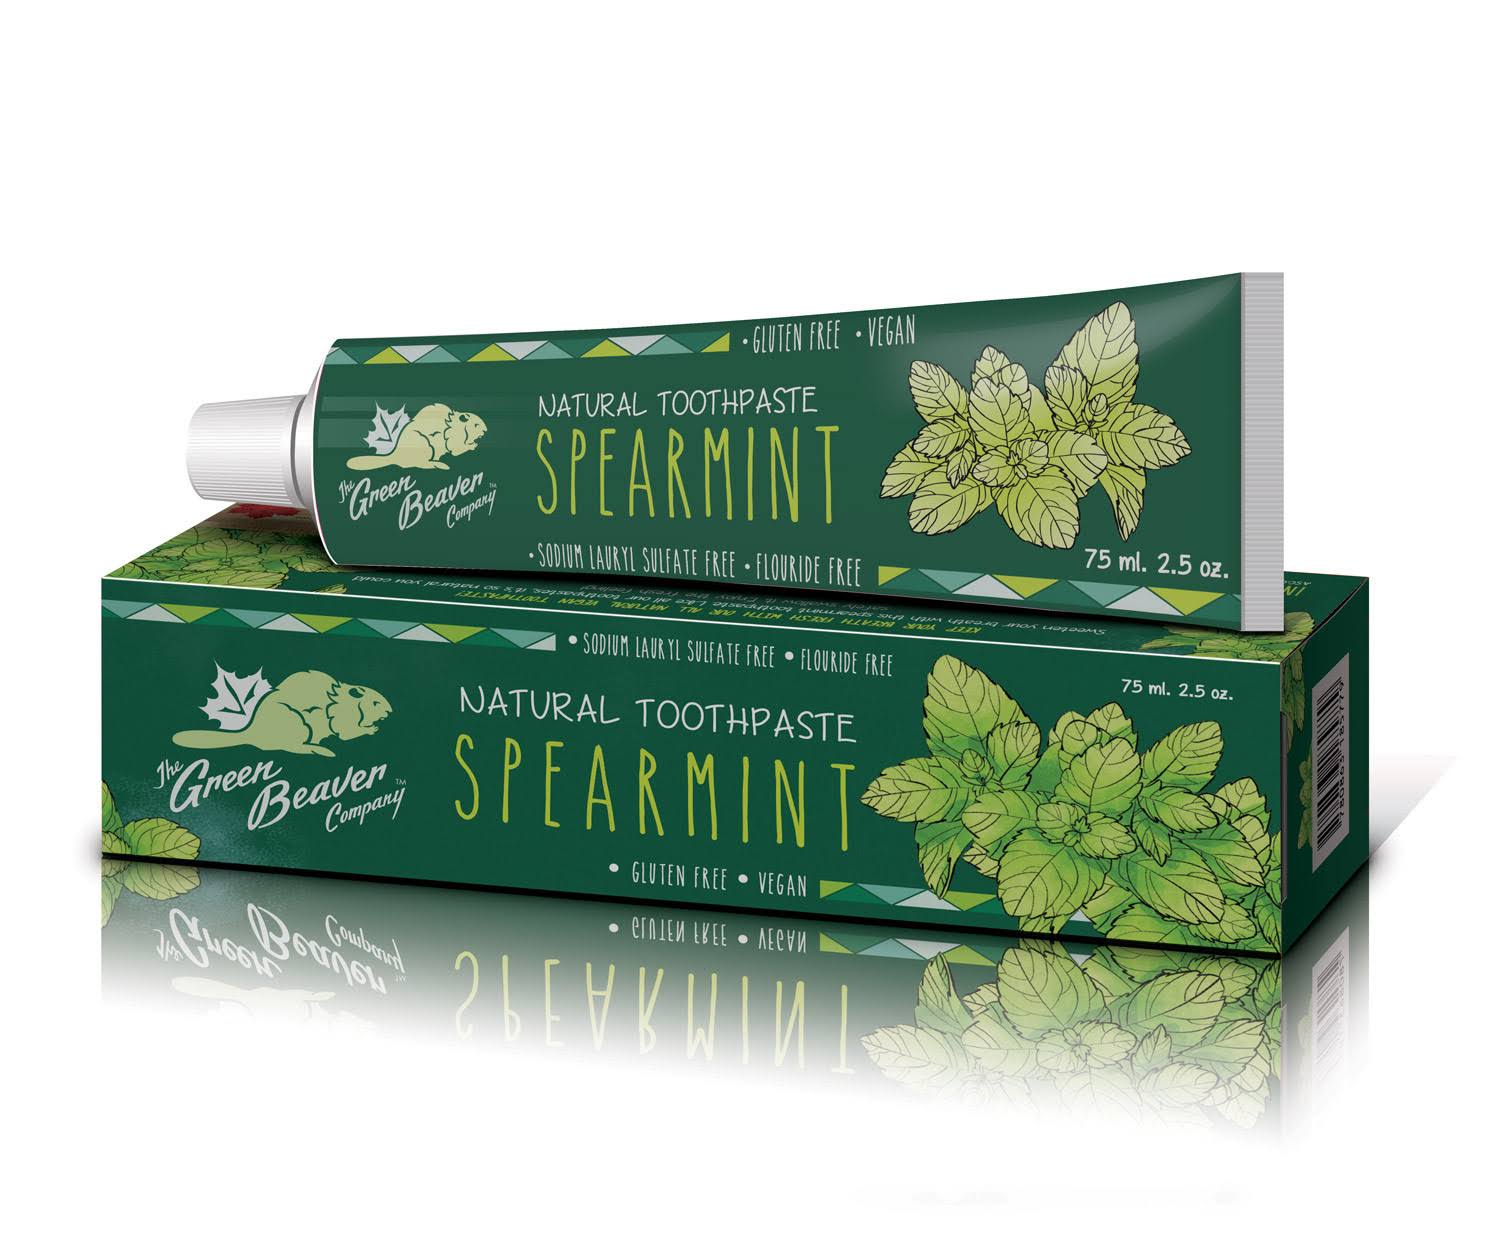 Green Beaver Natural Toothpaste, Spearmint 2.5 fl oz (Pack of 1)